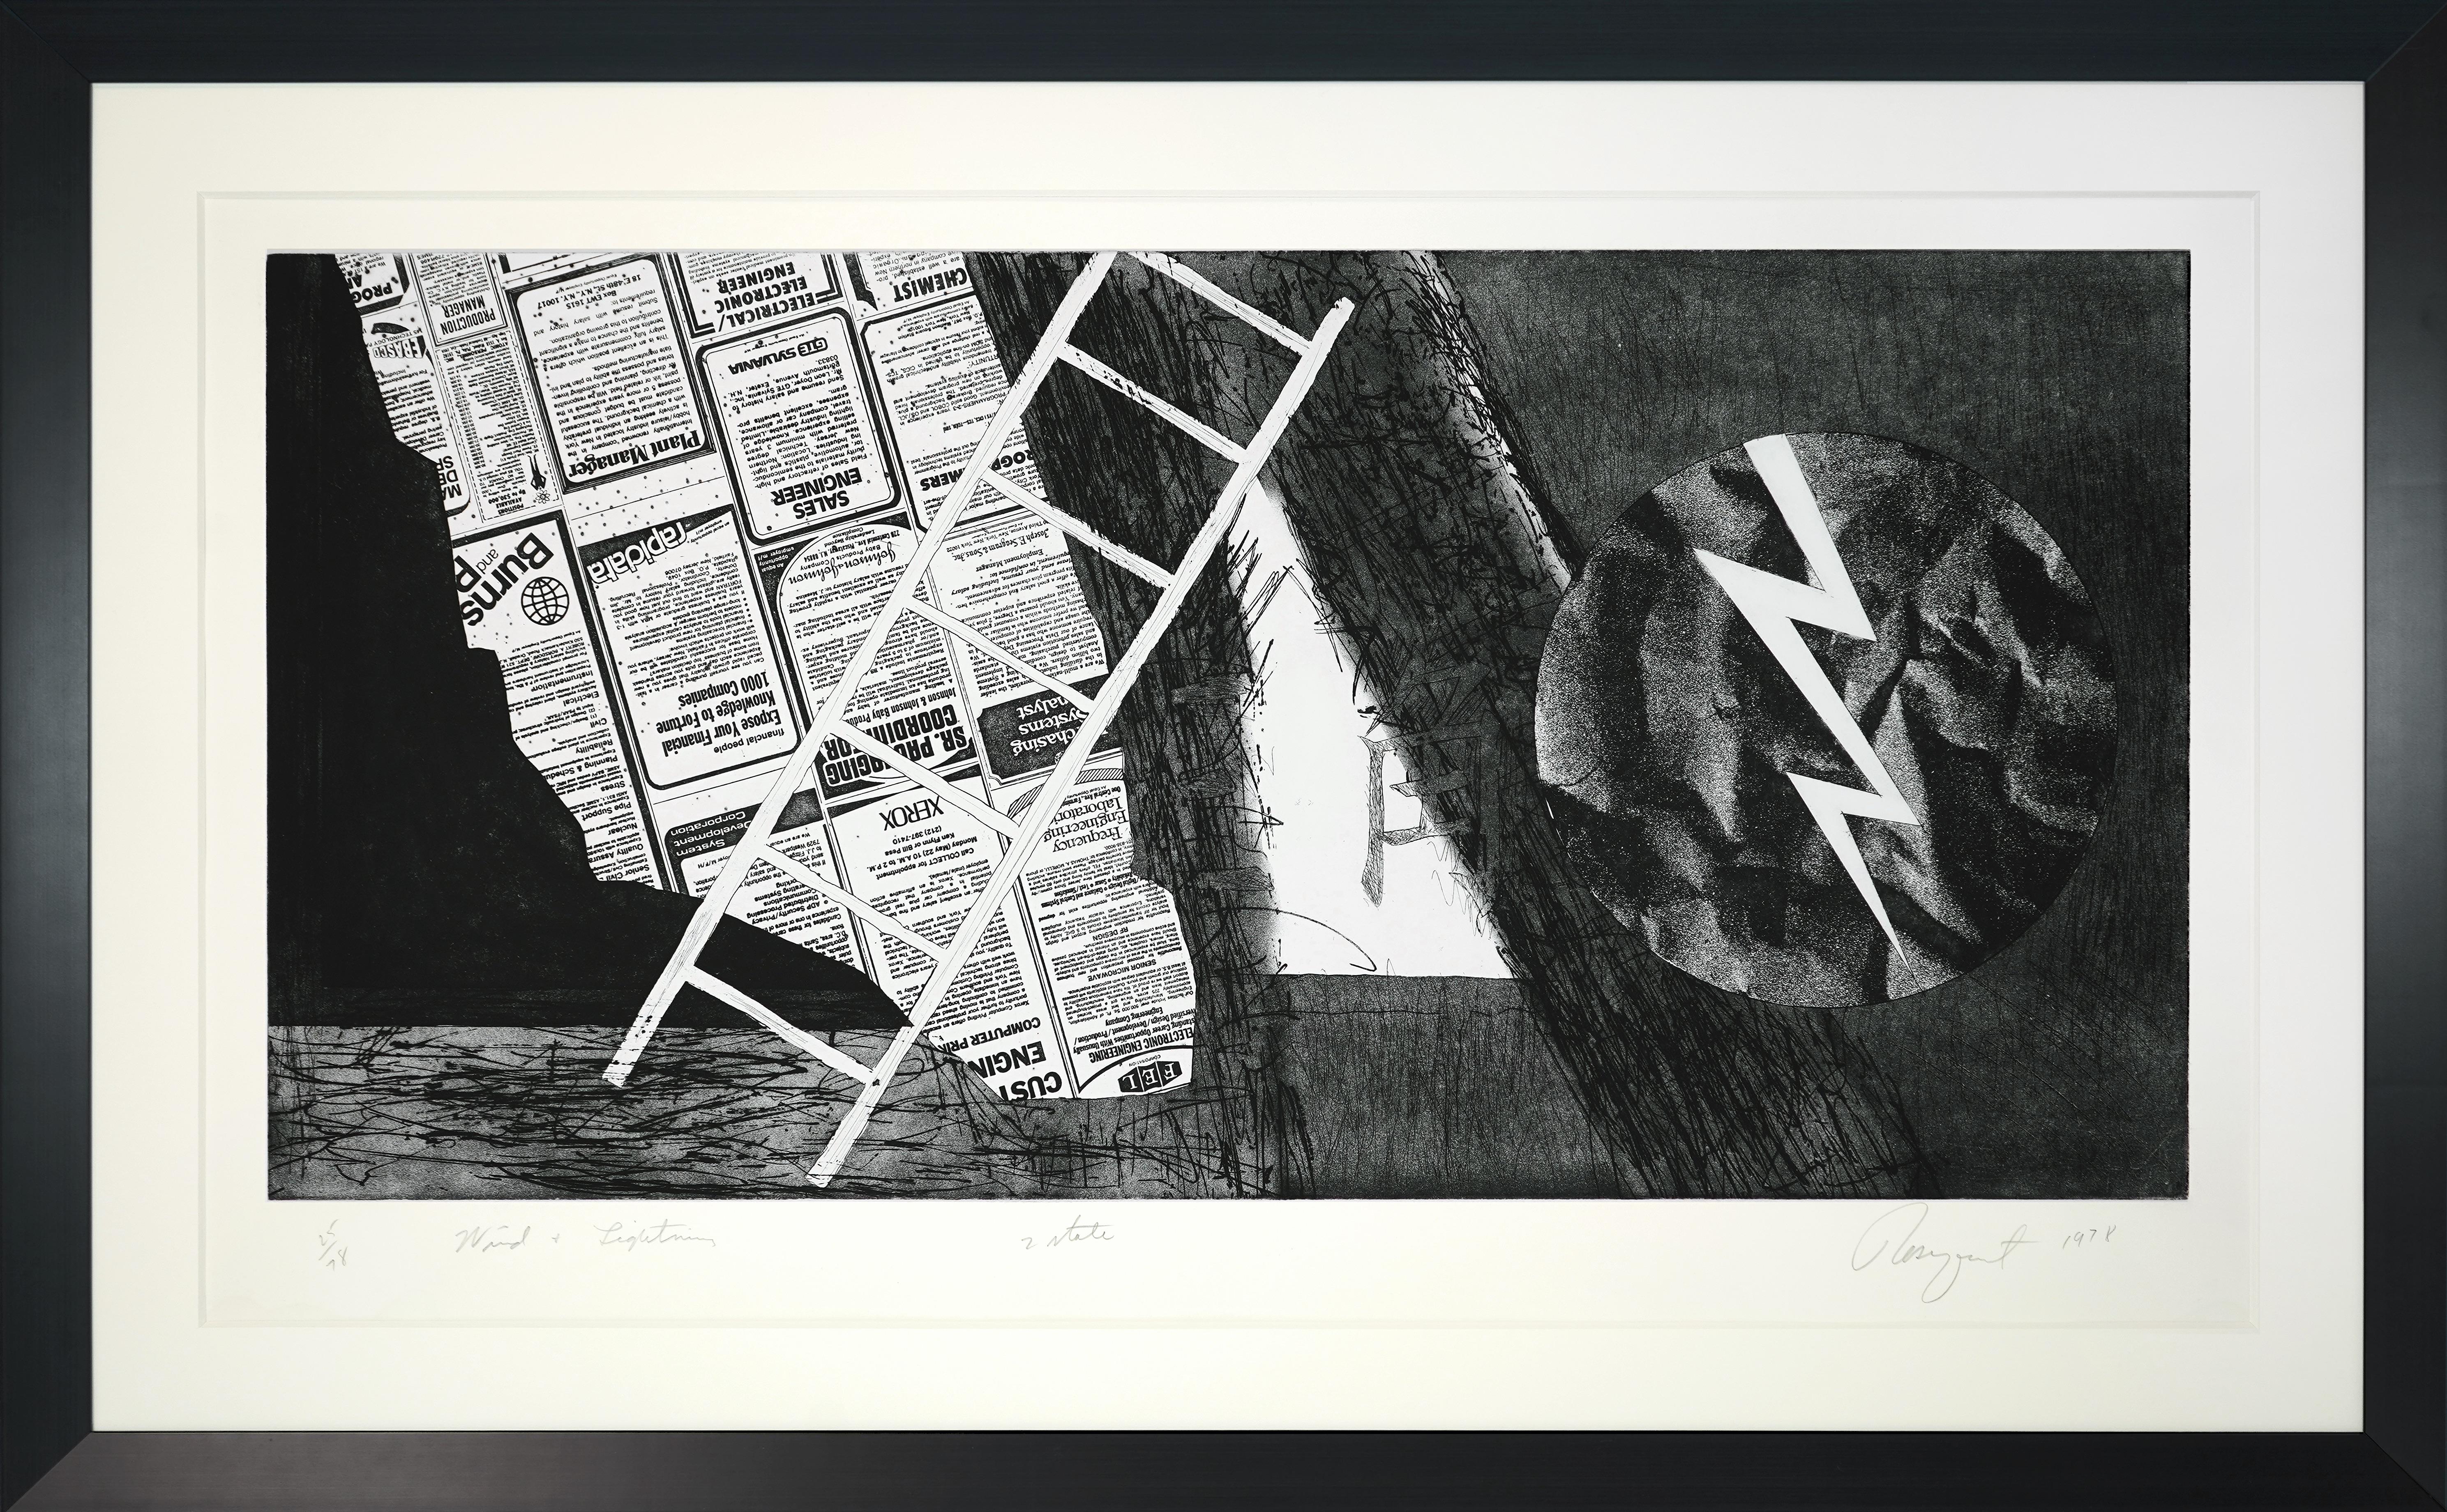 "Wind and Lightening" by James Rosenquist